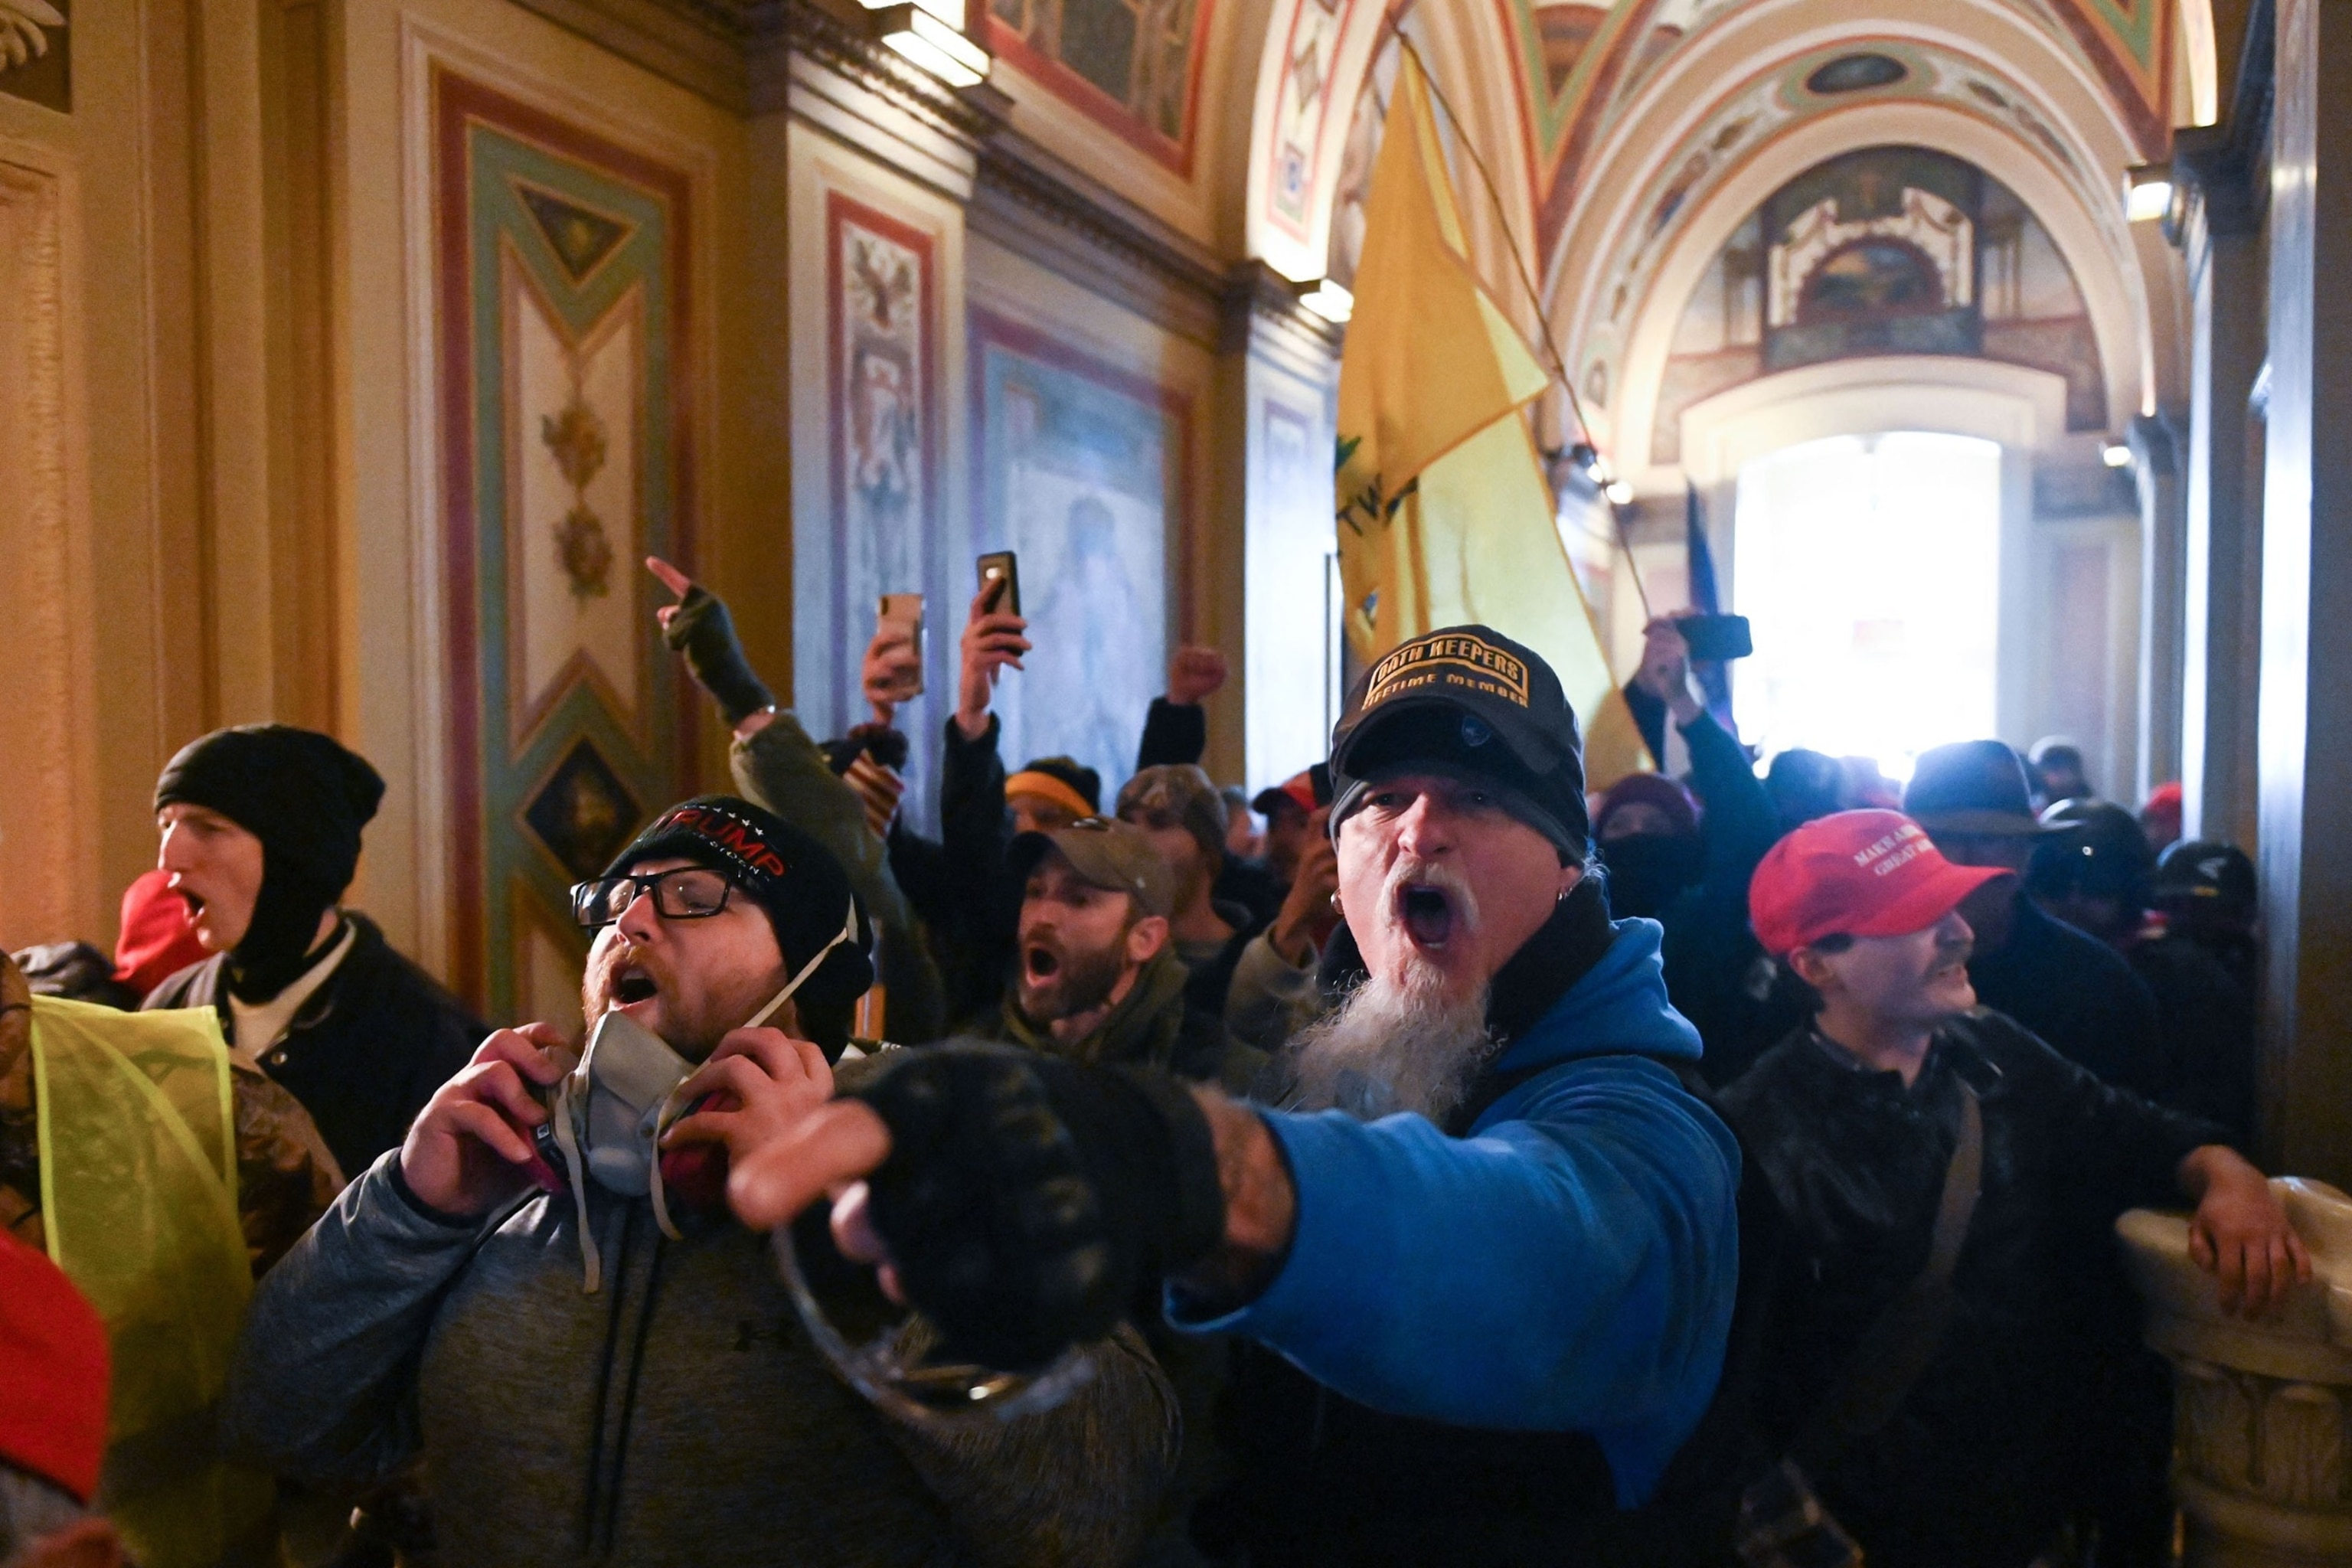 PHOTO: Supporters of President Donald Trump protest inside the US Capitol on January 6, 2021, in Washington, DC.